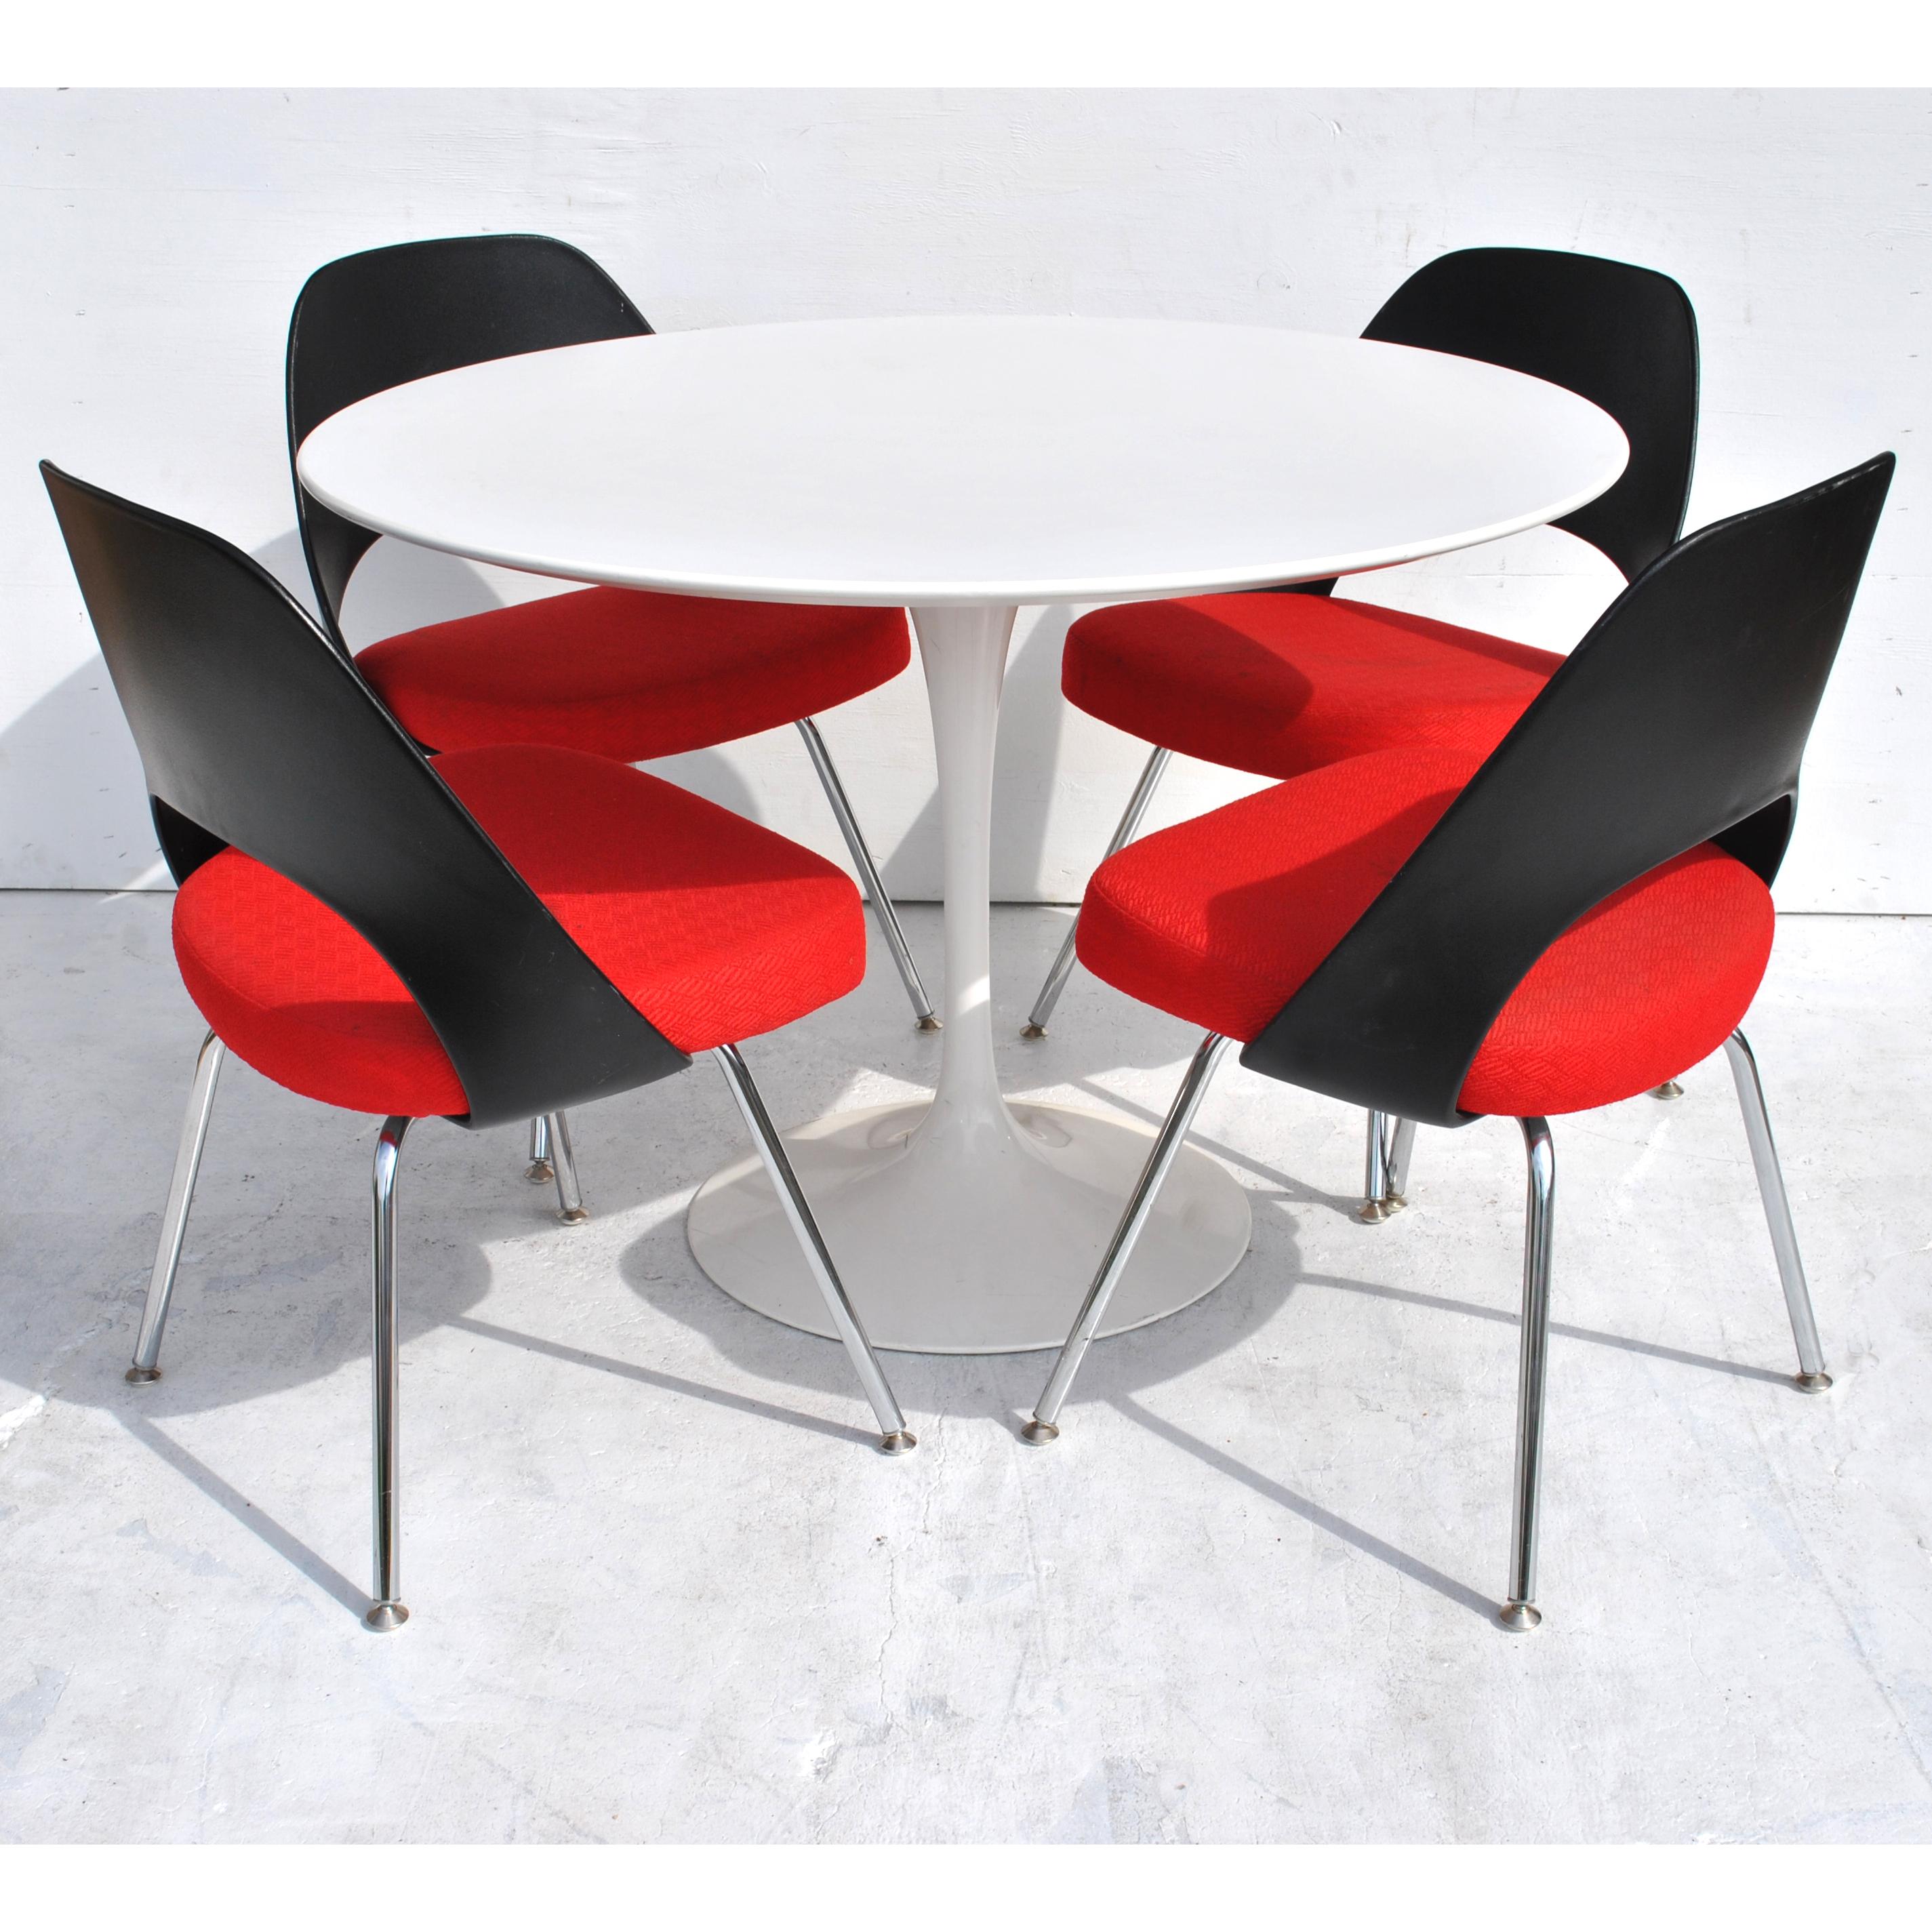 One Contemporary Knoll Eero Saarinen 72C-PC Dining Side Chair 8